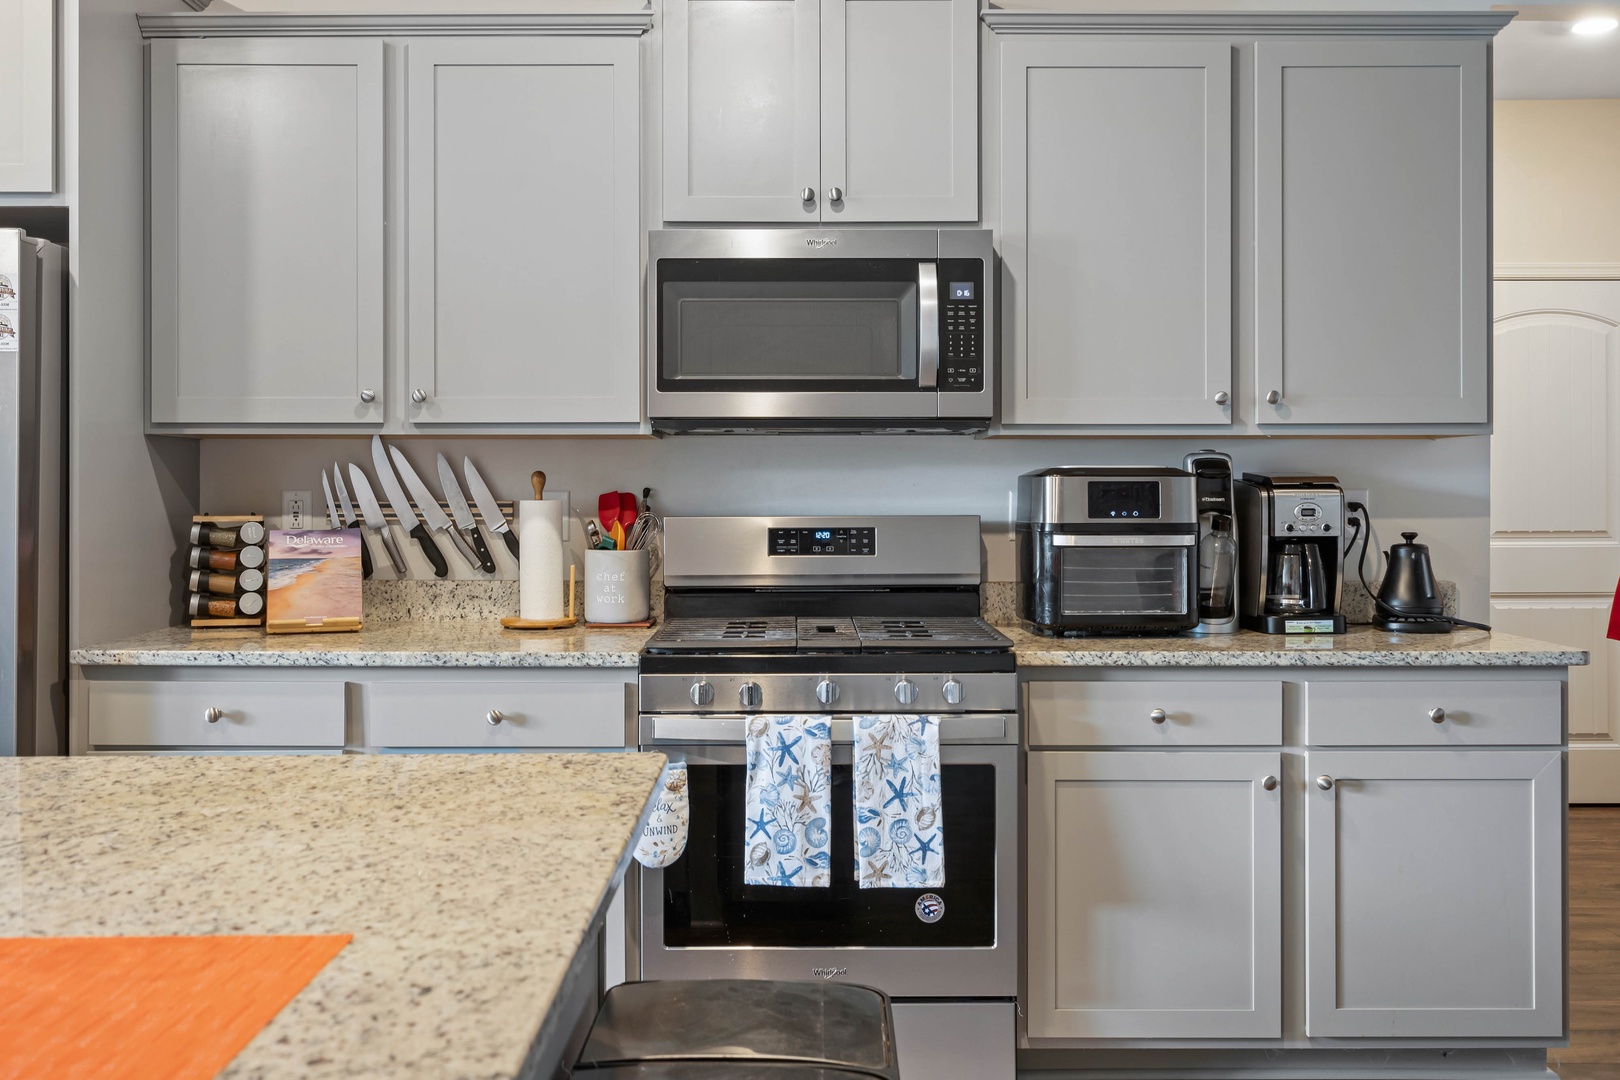 The chic, updated kitchen offers ample space & all the comforts of home